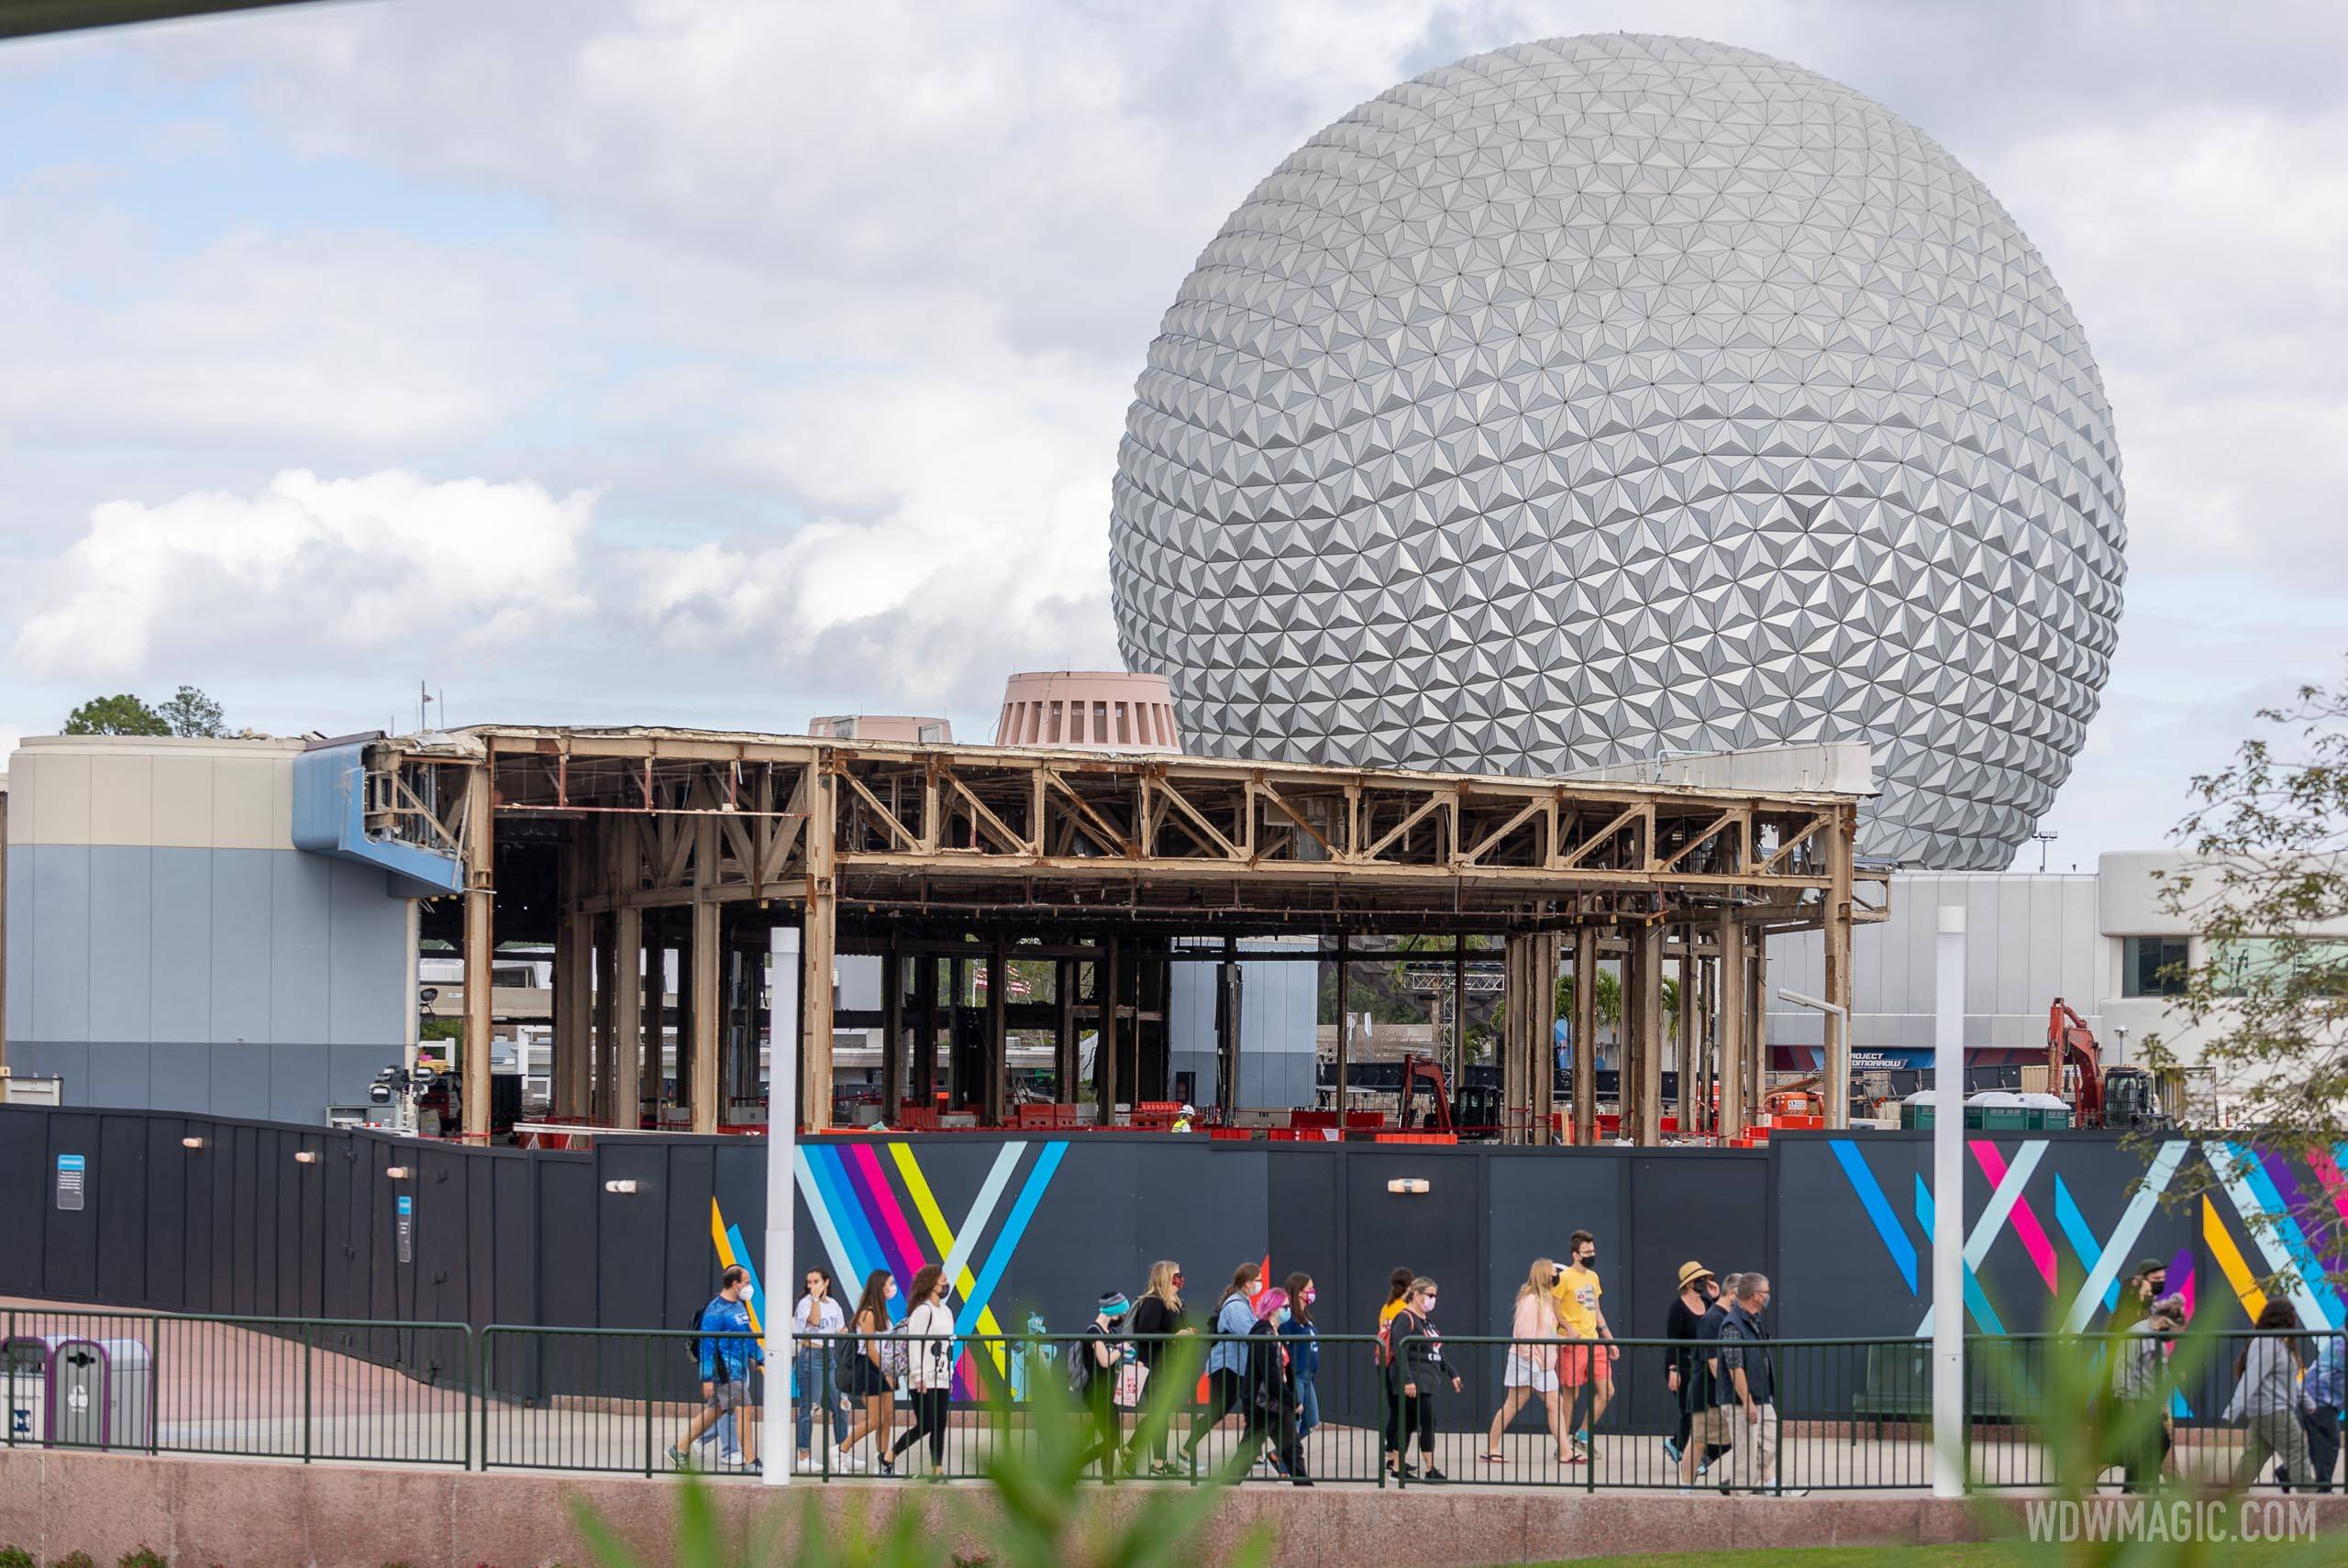 EPCOT Central Spine demolition and construction - January 8 2021